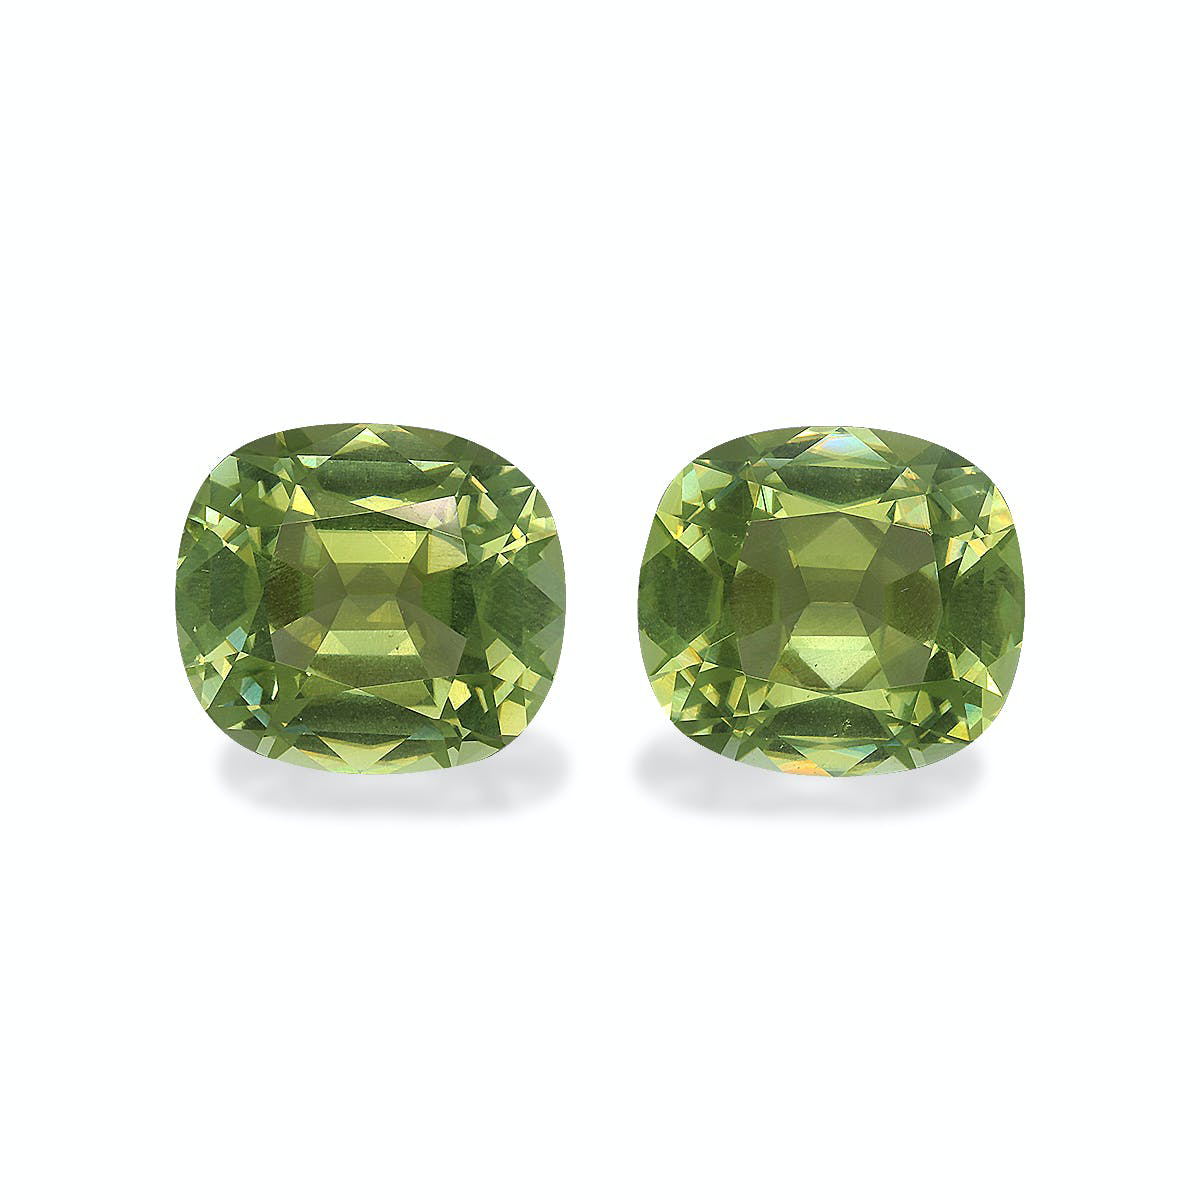 Picture of Pale Green Cuprian Tourmaline 21.48ct - 15x13mm Pair (MZ0252)